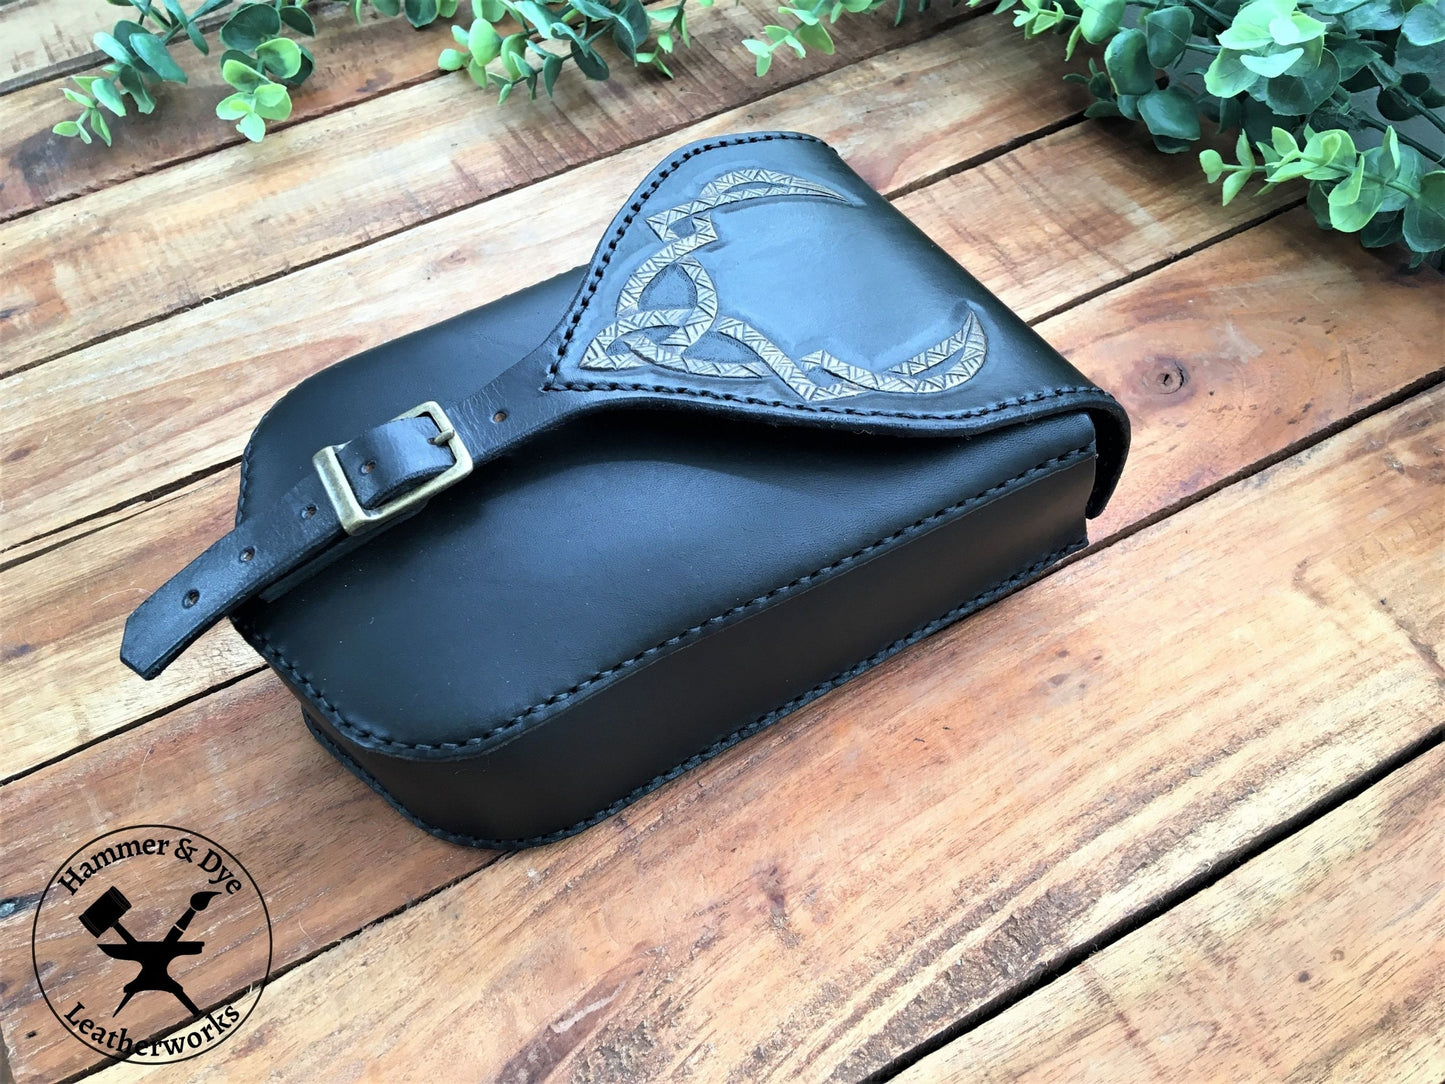 Large Handmade Black Leather Belt Pouch with Buckle Closing and Viking Style Knotwork Carving 